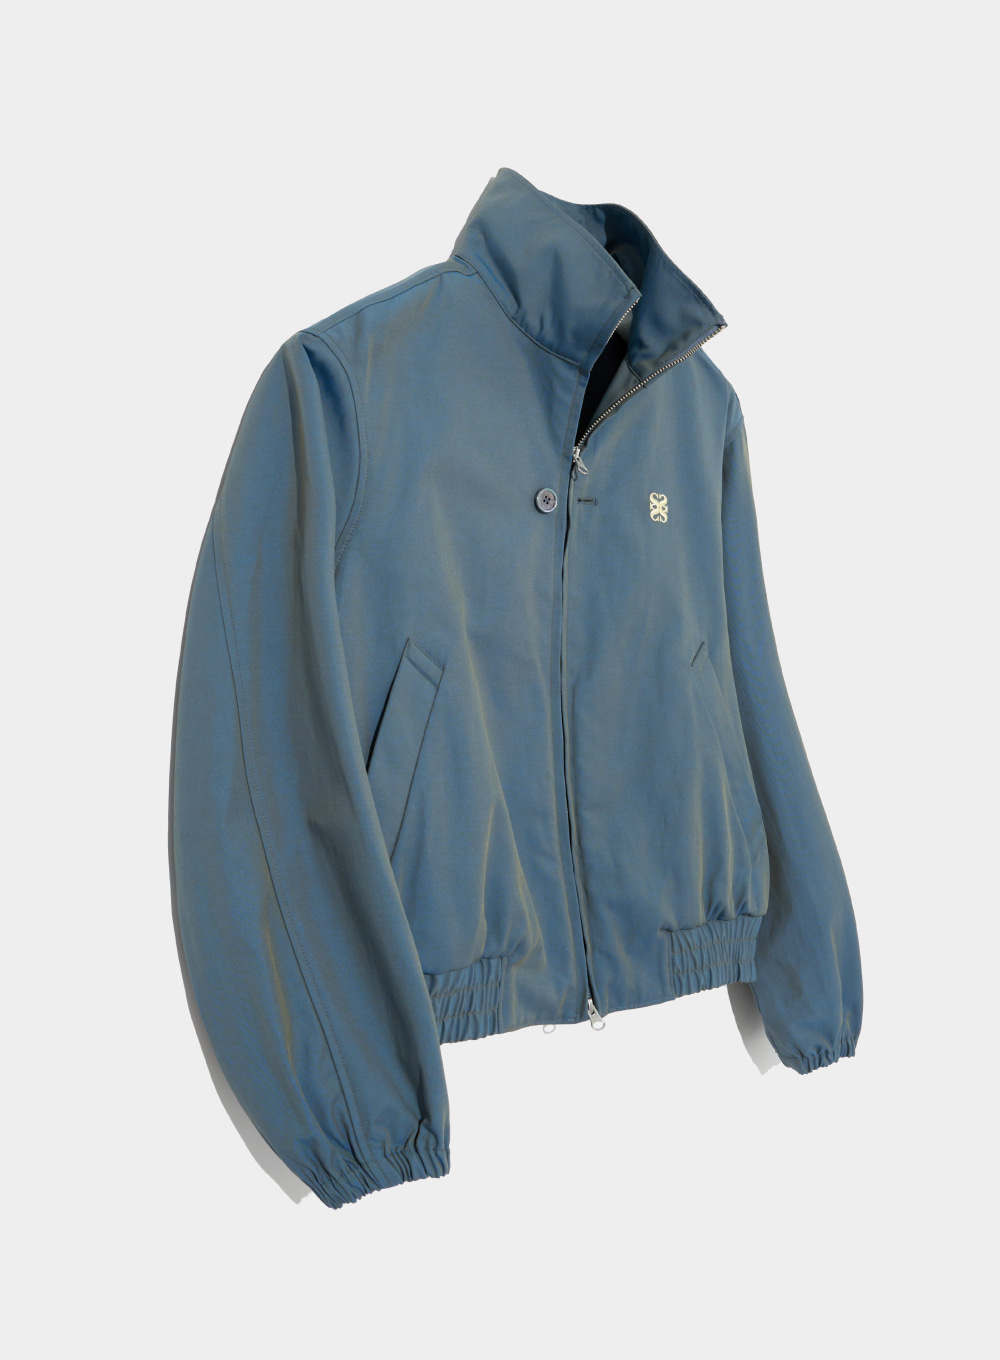 Lecce Two Tone Zip Up Jacket - Emerald Blue